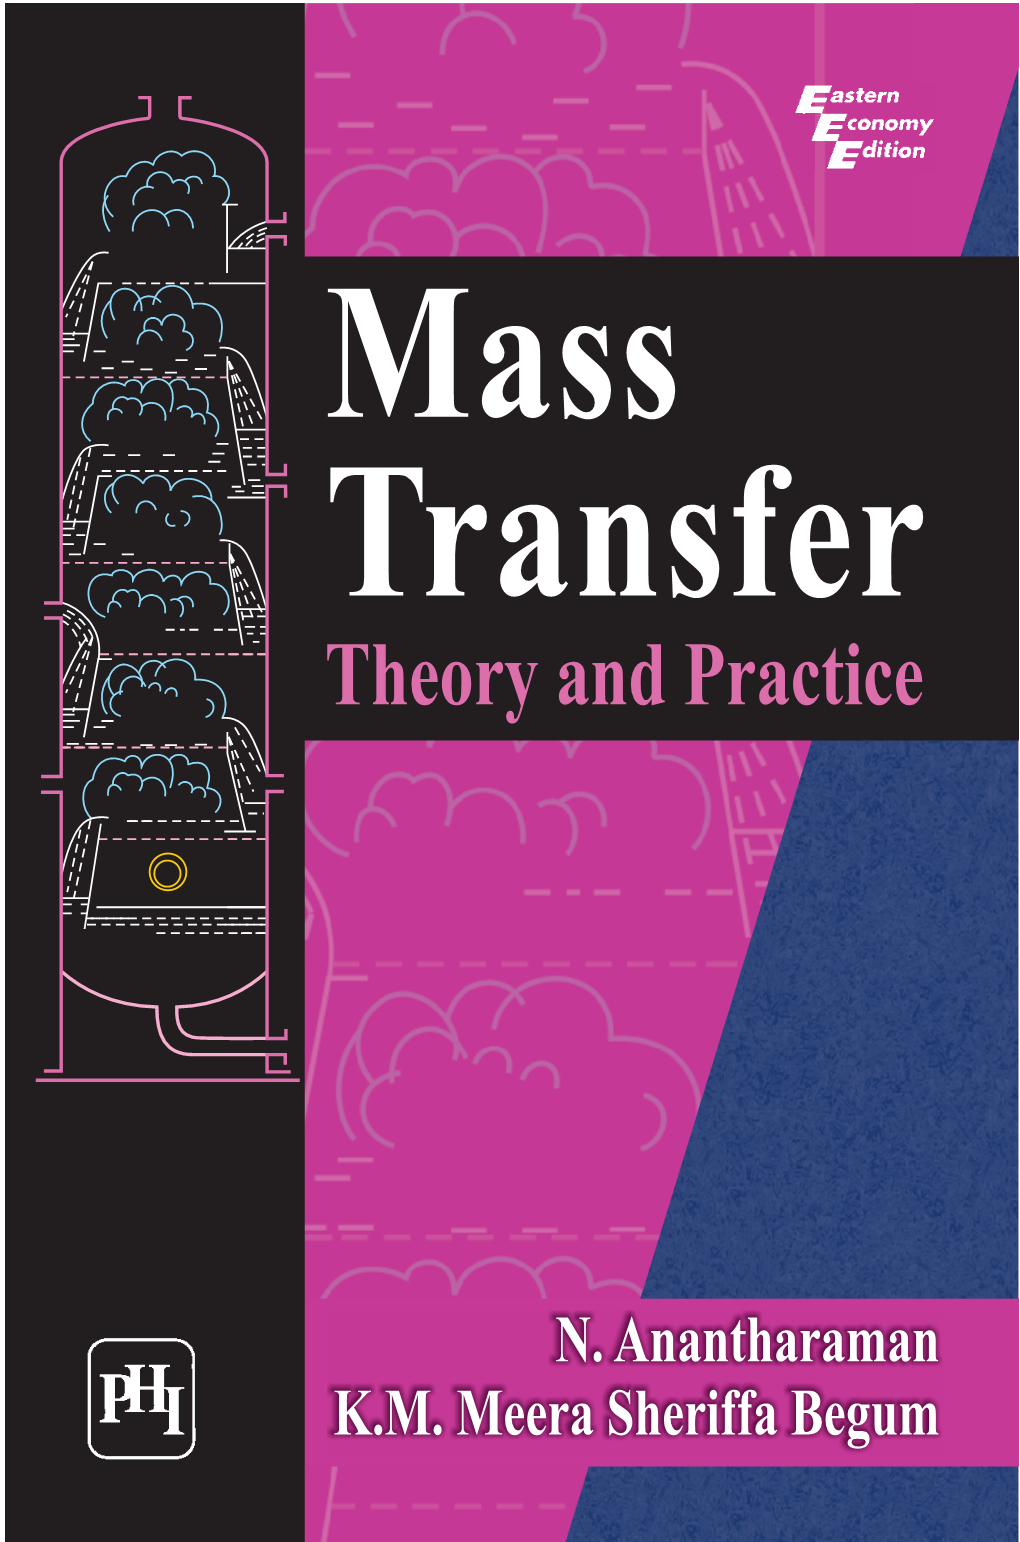 MASS TRANSFER: Theory and Practice N